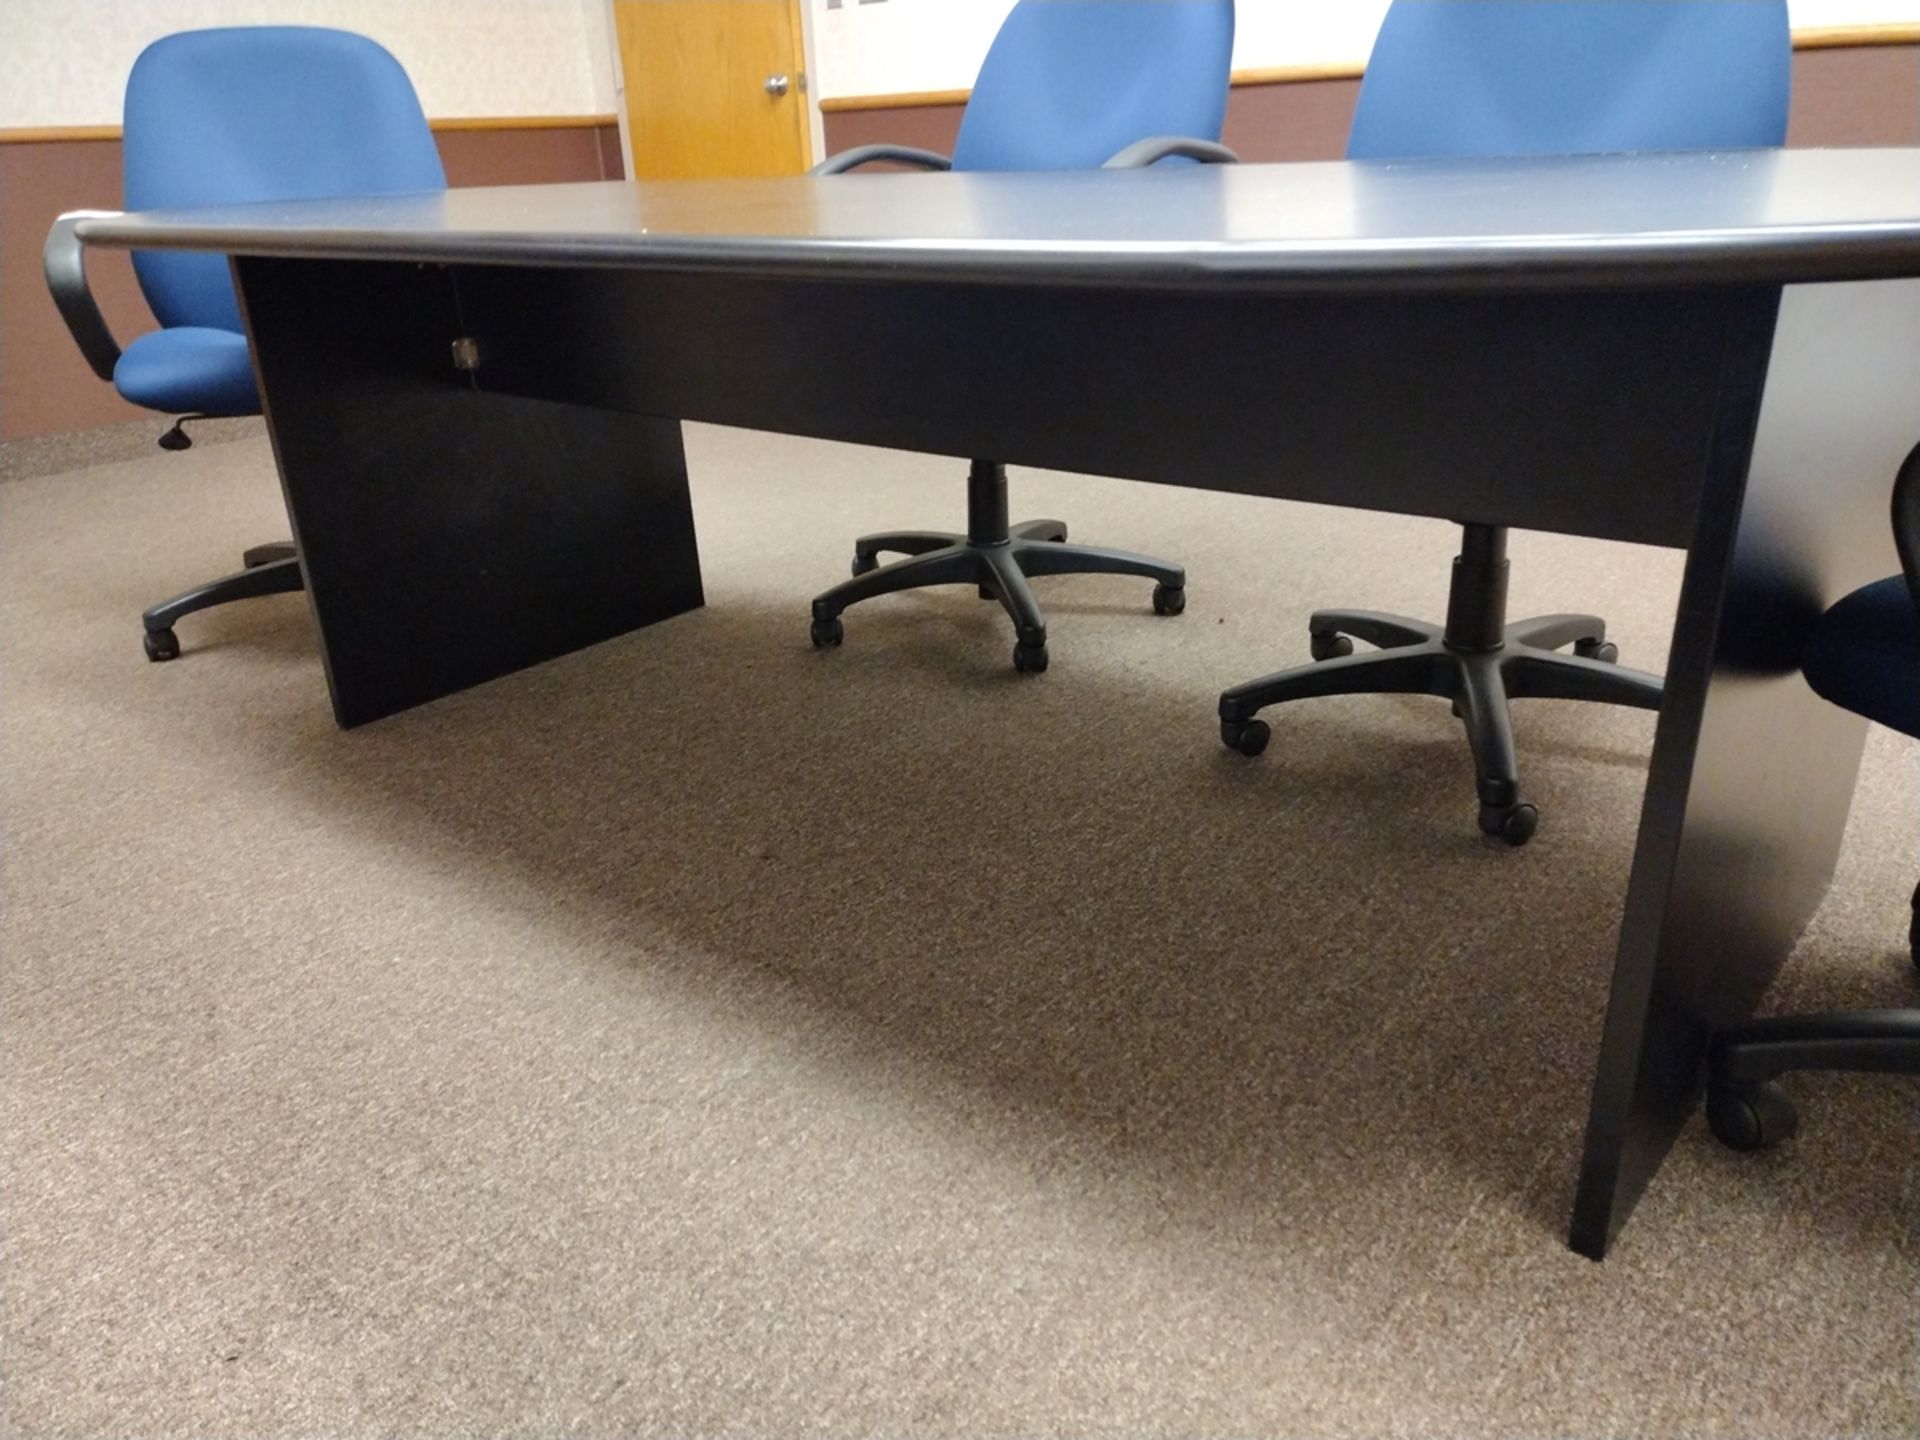 8ft Wood Laminate Conference Table and Chairs - Image 4 of 5